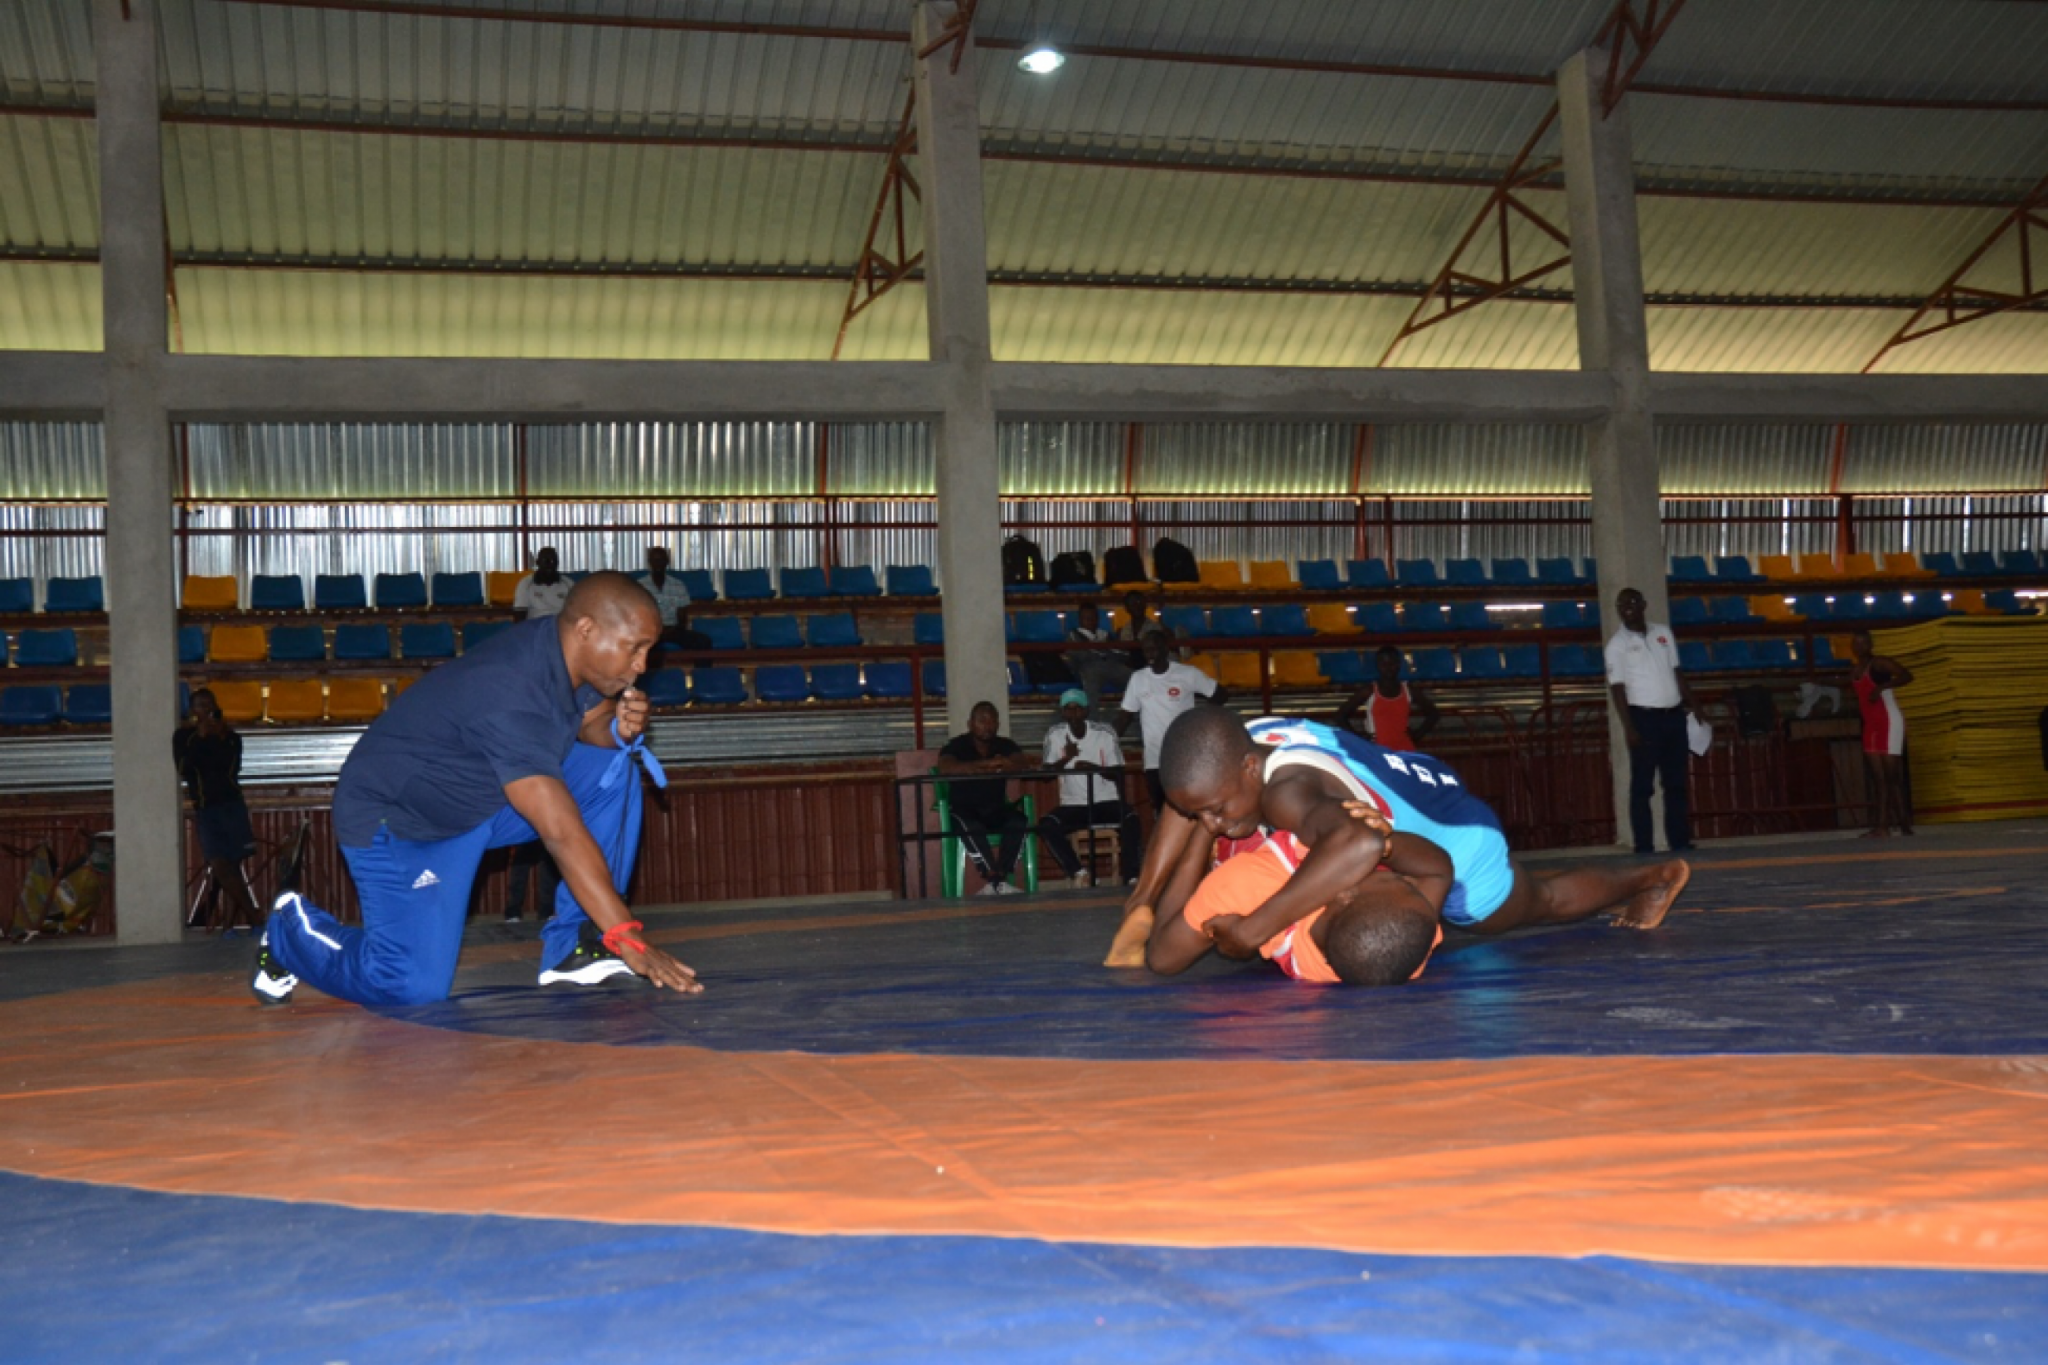 The Burundi Olympic Committee hosted a wrestling coaching course and national competition in Bujumbura ©UWW